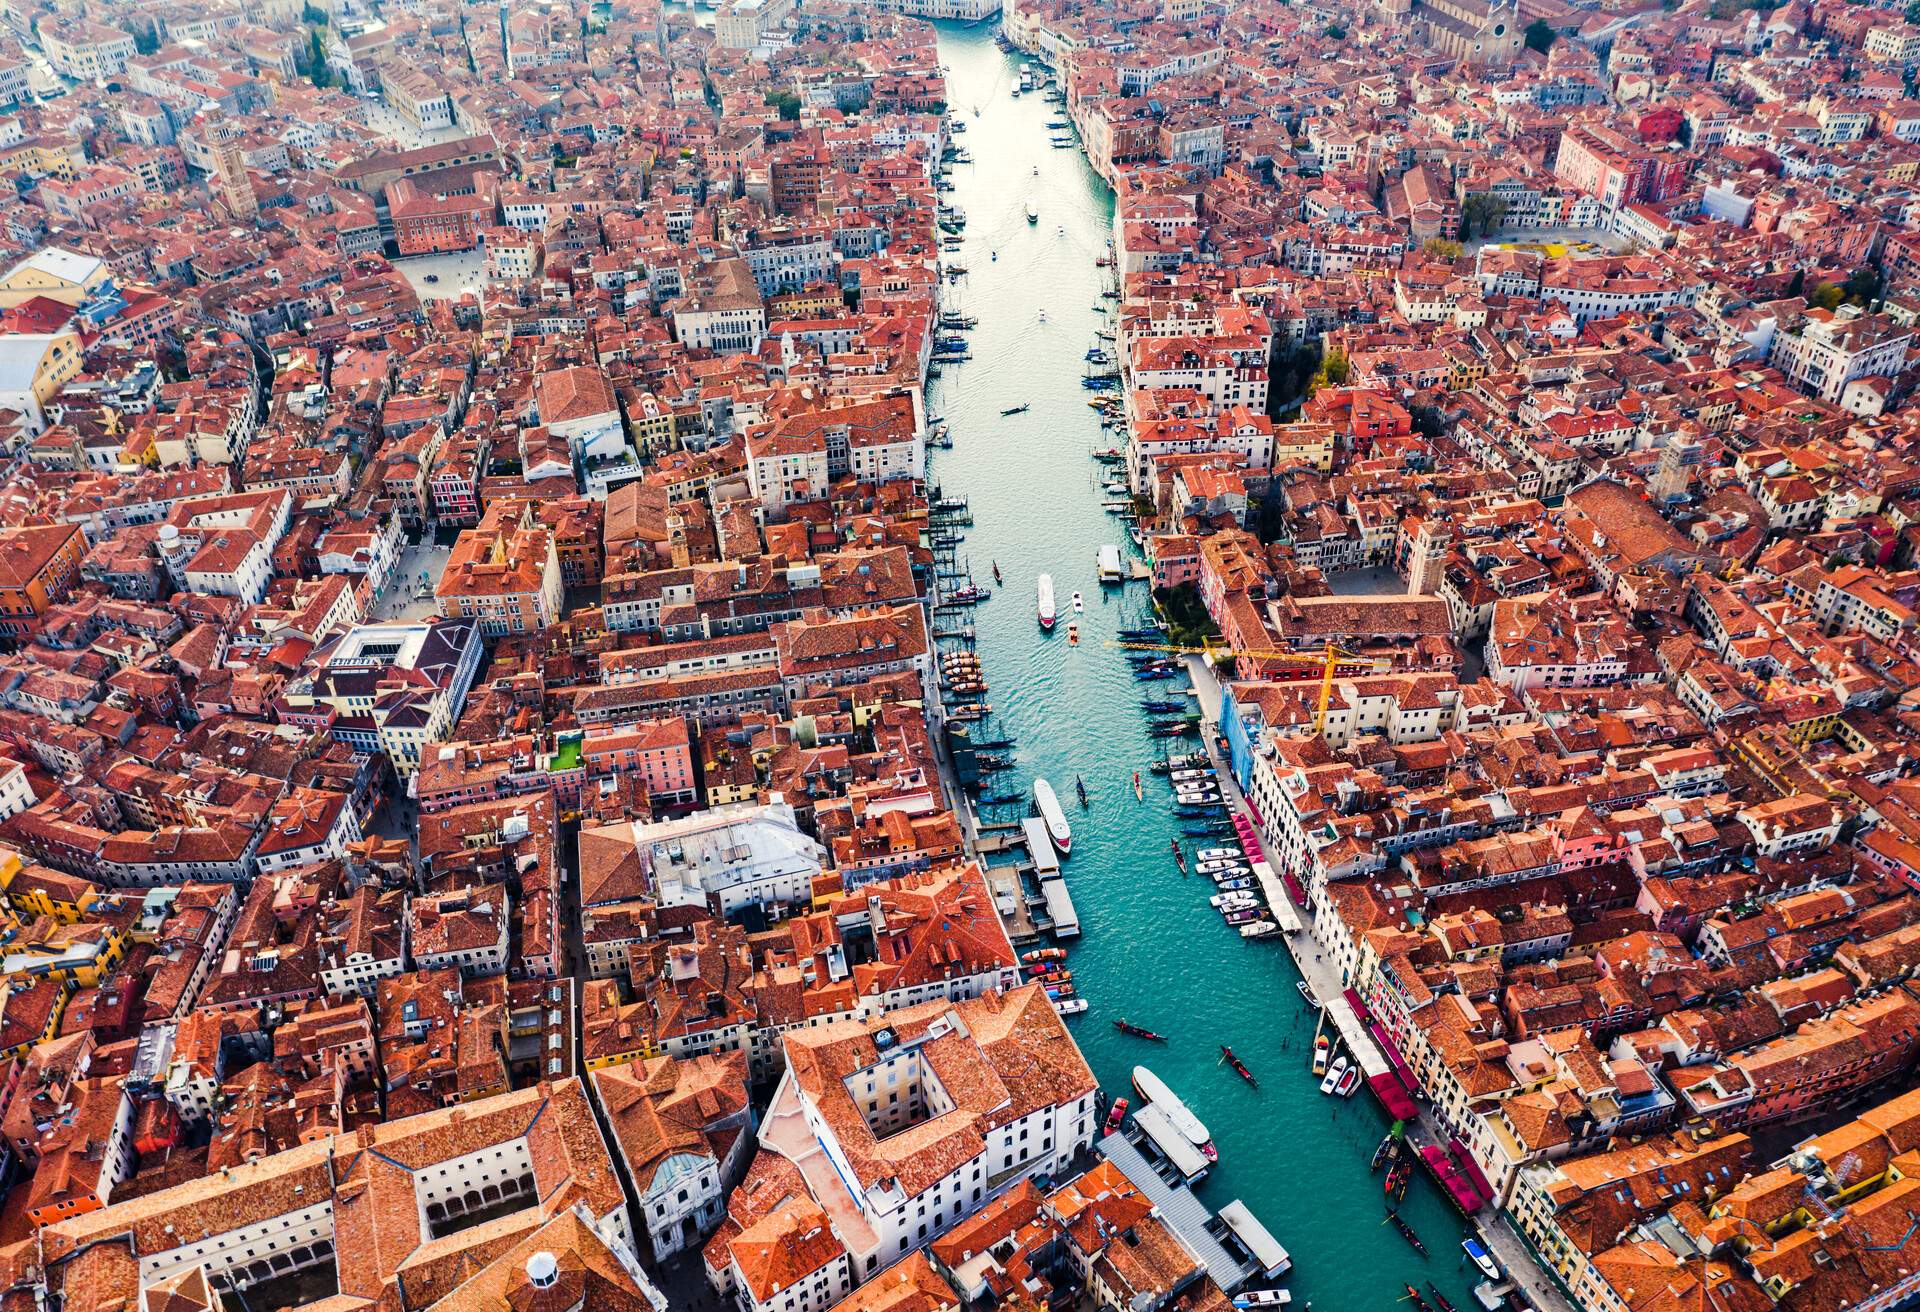 DEST_ITALY_VENICE_GRAND-CANAL-GettyImages-1090924034